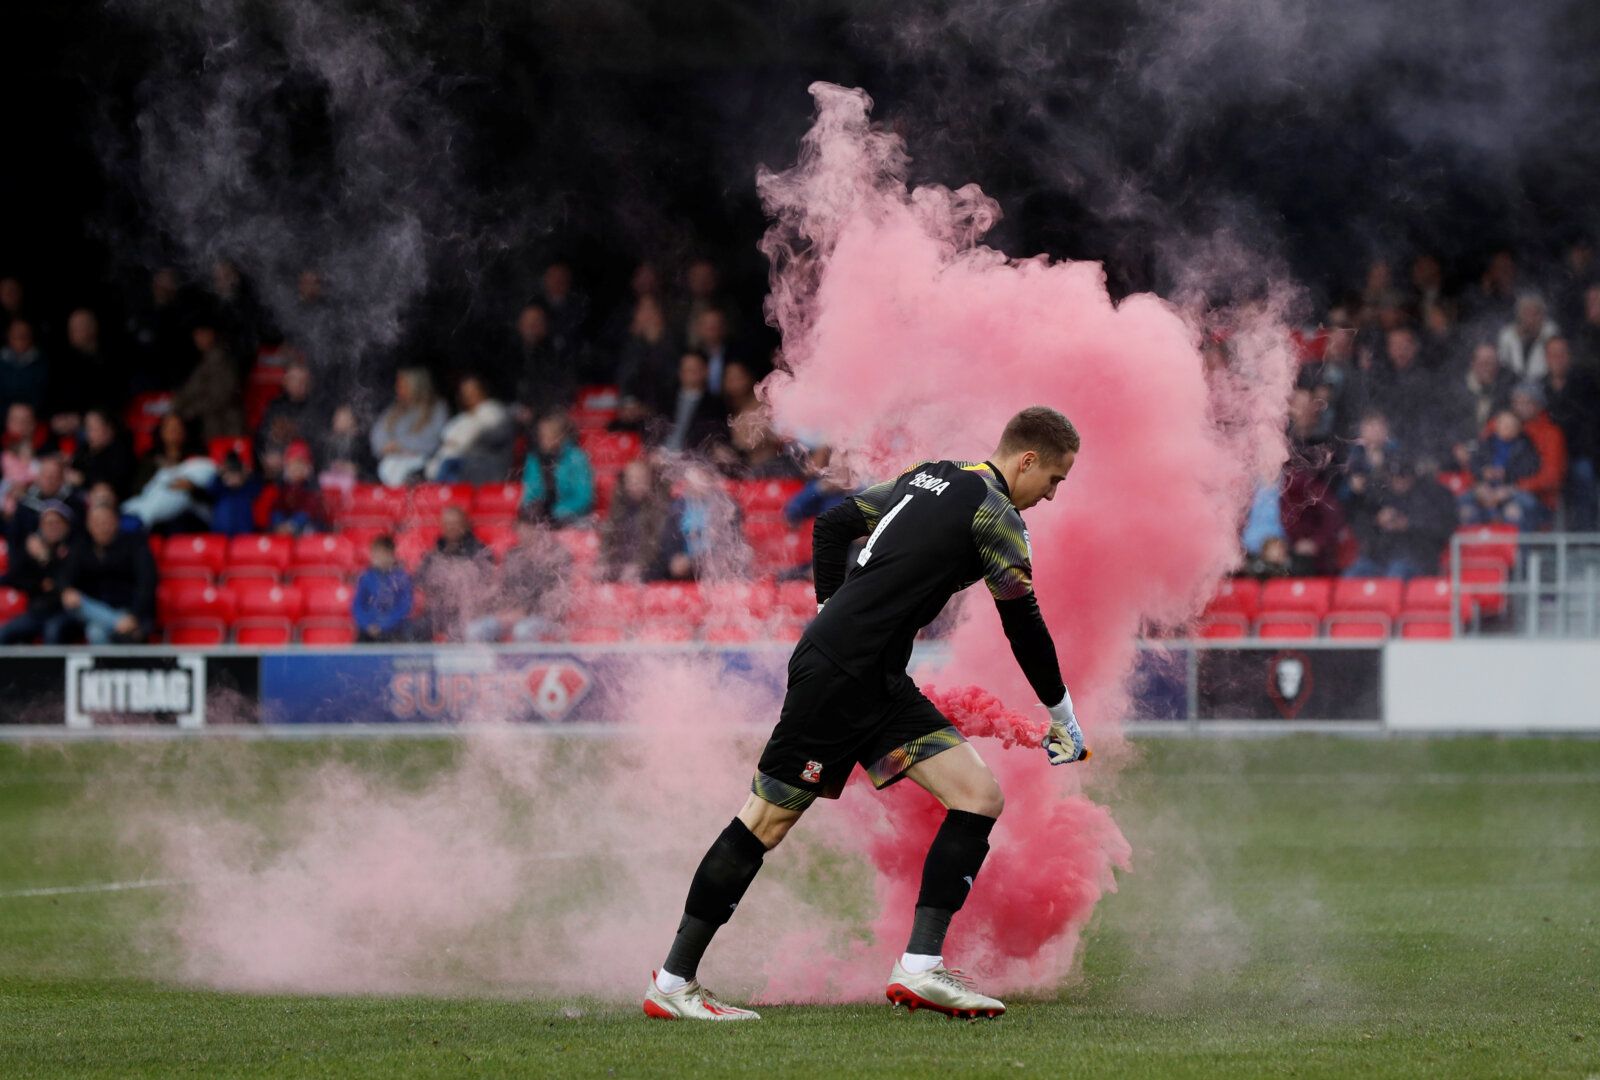 Soccer Football - League Two - Salford City v Swindon Town - The Peninsula Stadium, Salford, Britain - November 16, 2019   Swindon Town's Steven Benda removes a flare following Salford City's first goal    Action Images/Lee Smith    EDITORIAL USE ONLY. No use with unauthorized audio, video, data, fixture lists, club/league logos or 